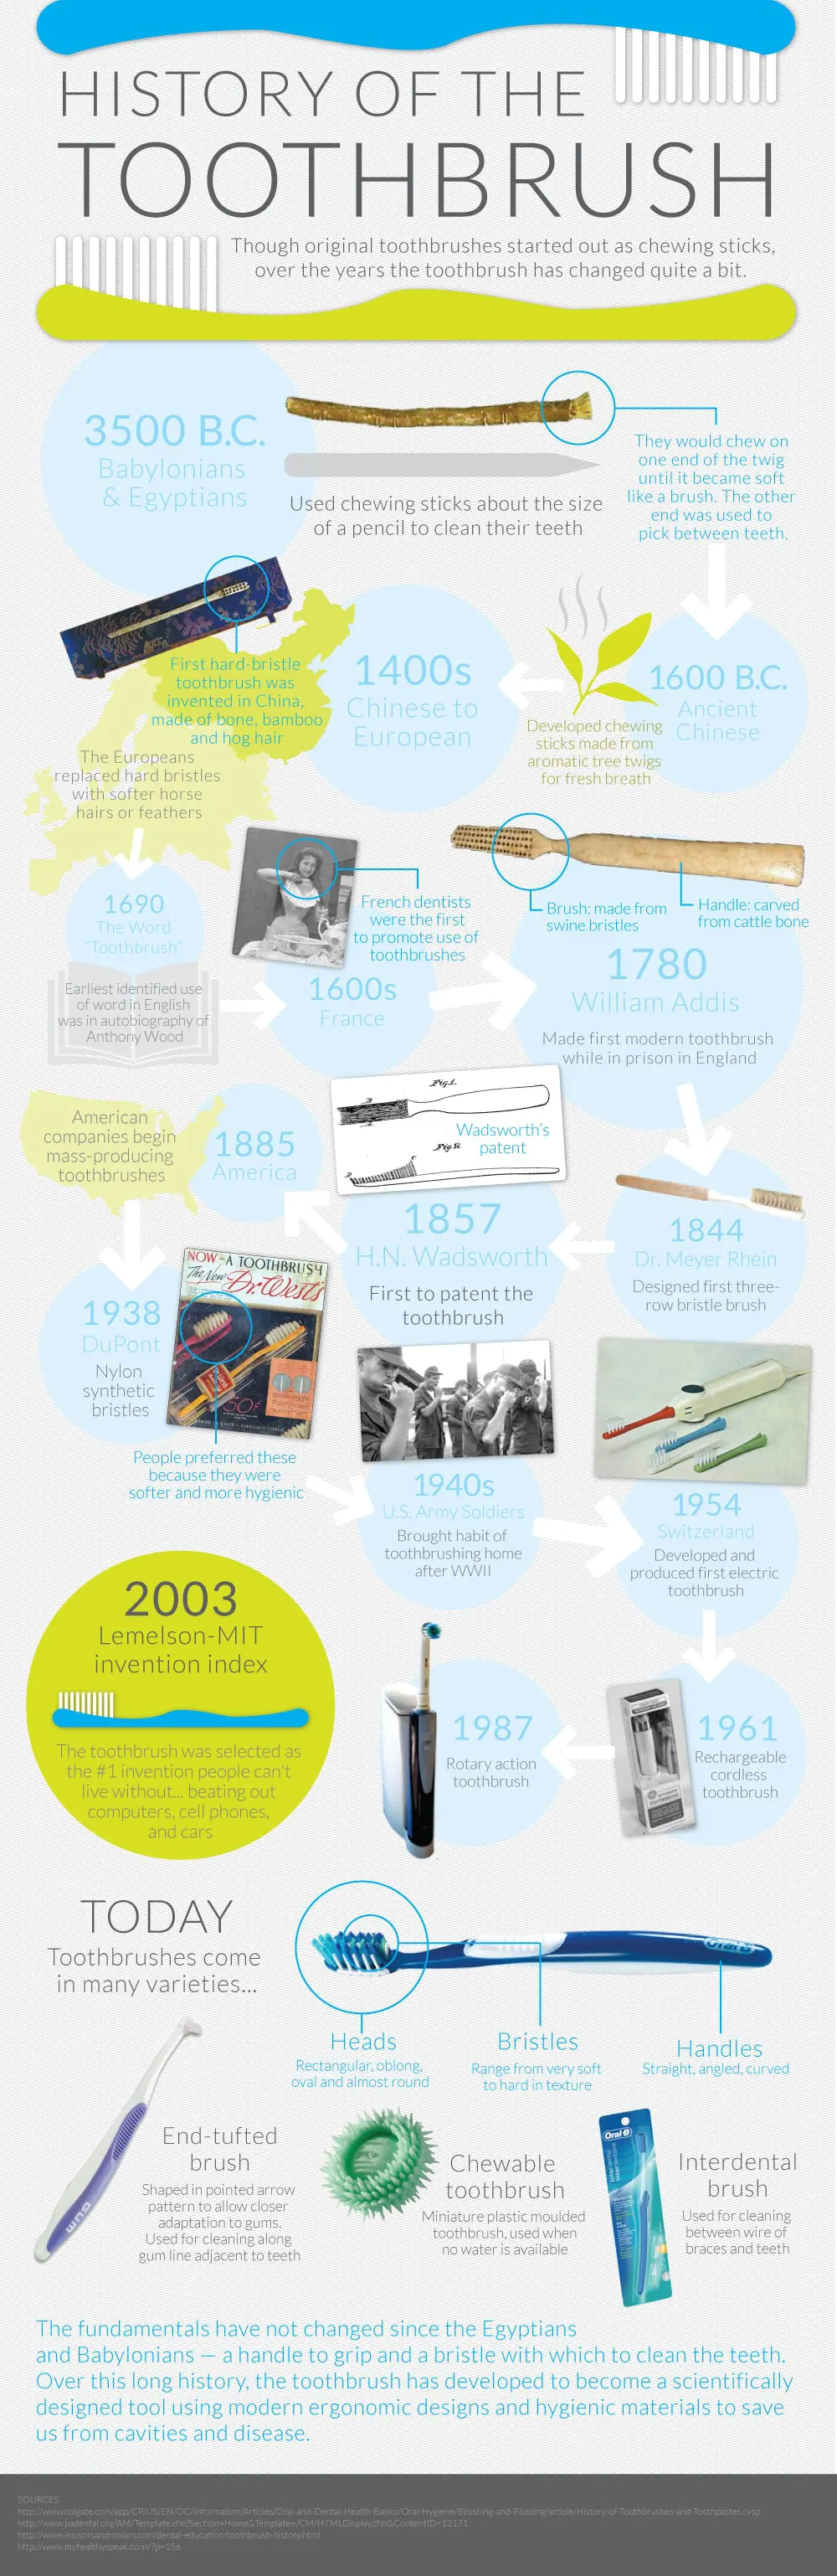 history of the toothbrush infographic